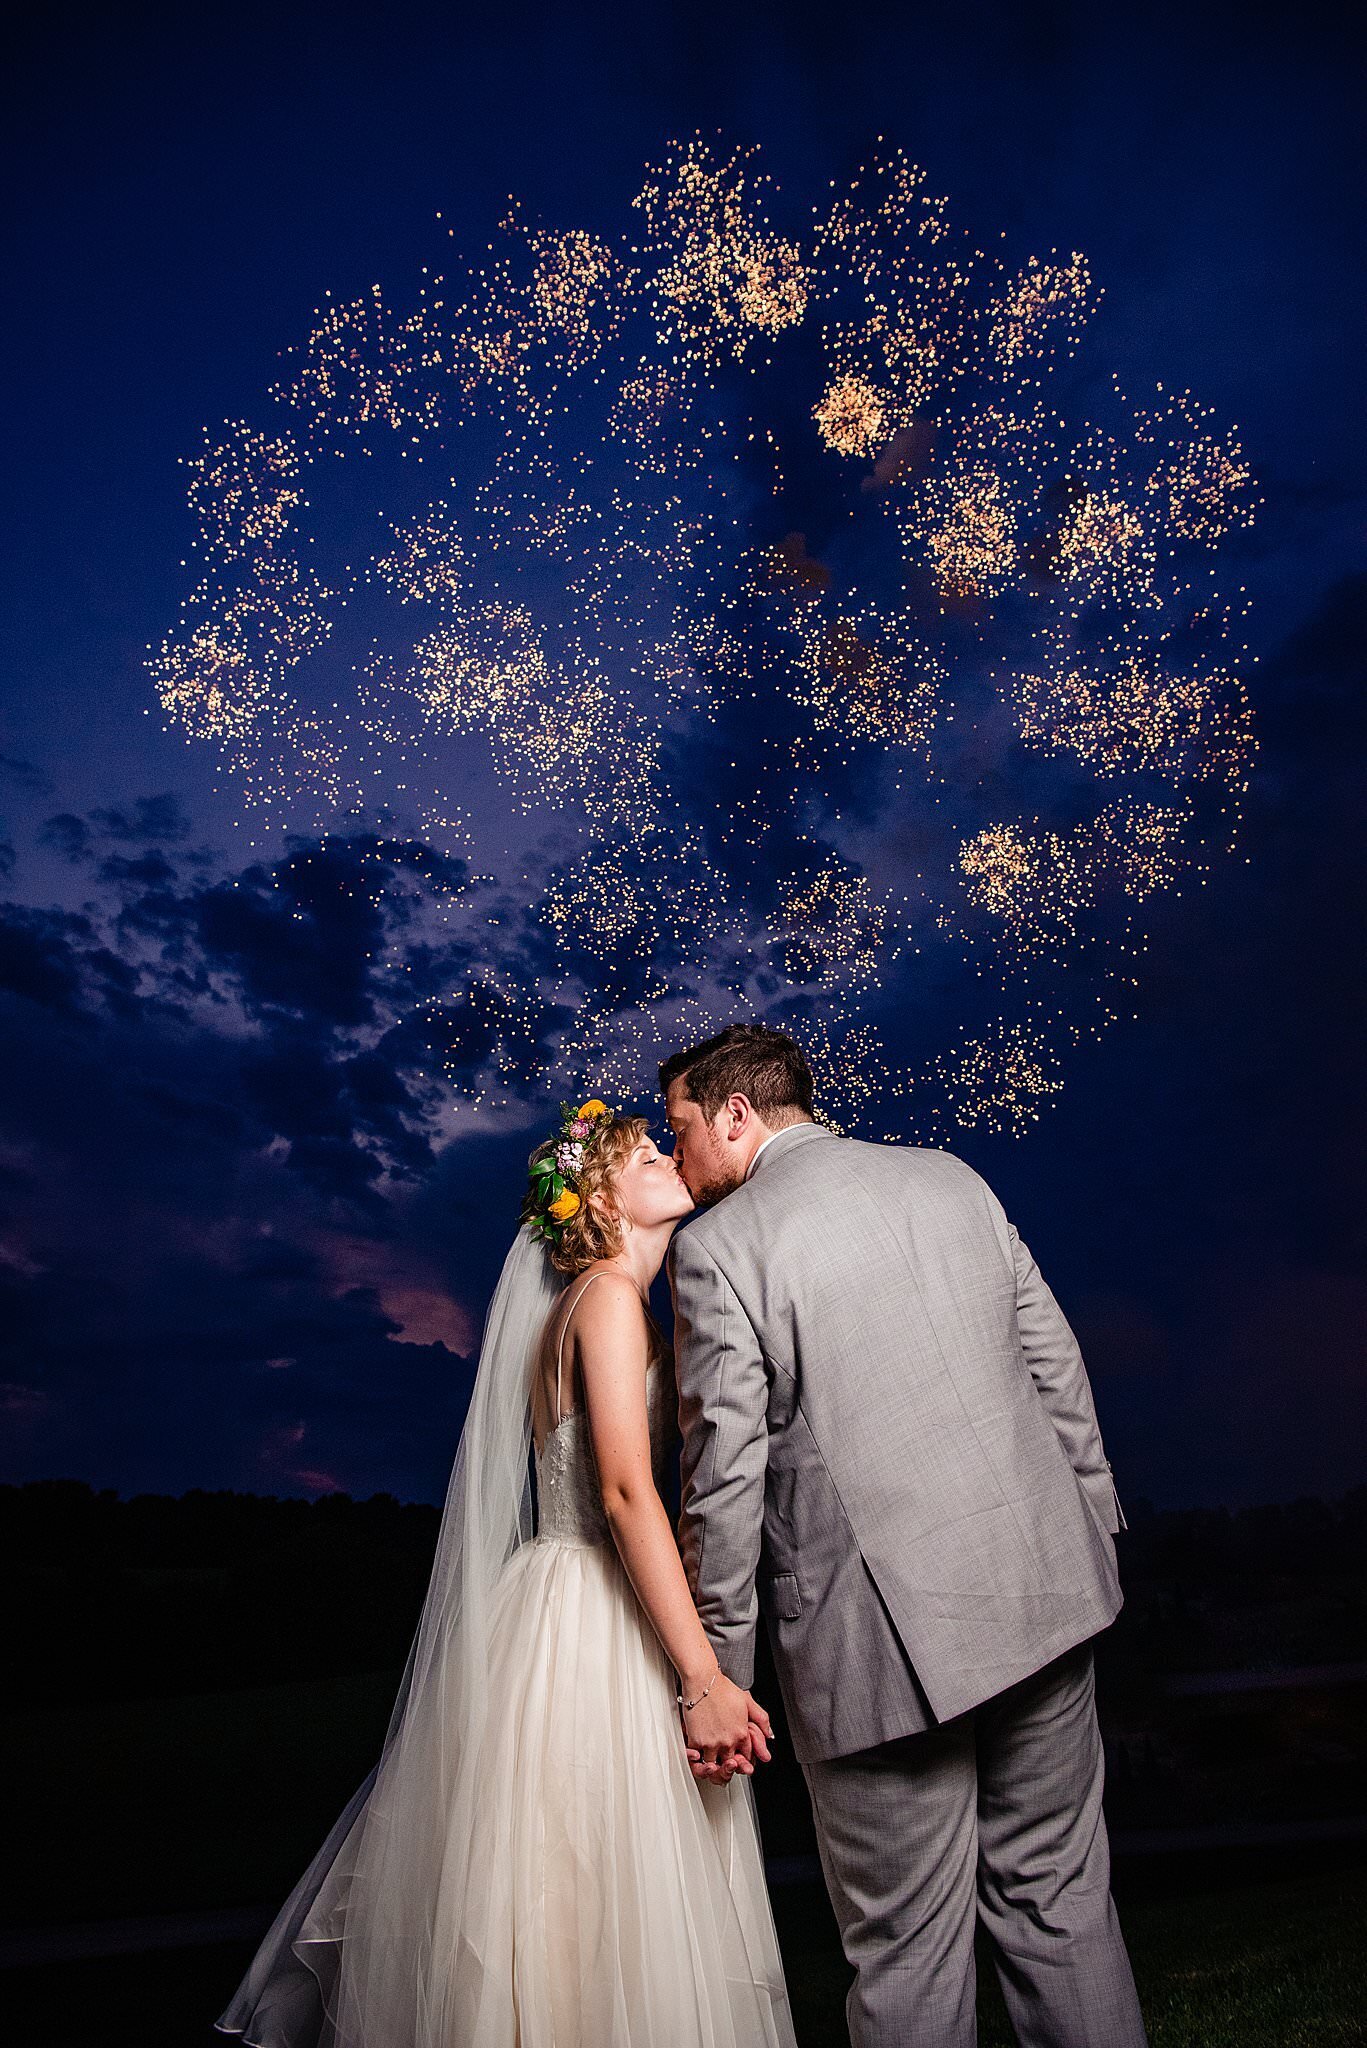 Bride and Groom watching fireworks during sunset at White Dove Barn, they are leaning in for a kiss and she has a flower crown on